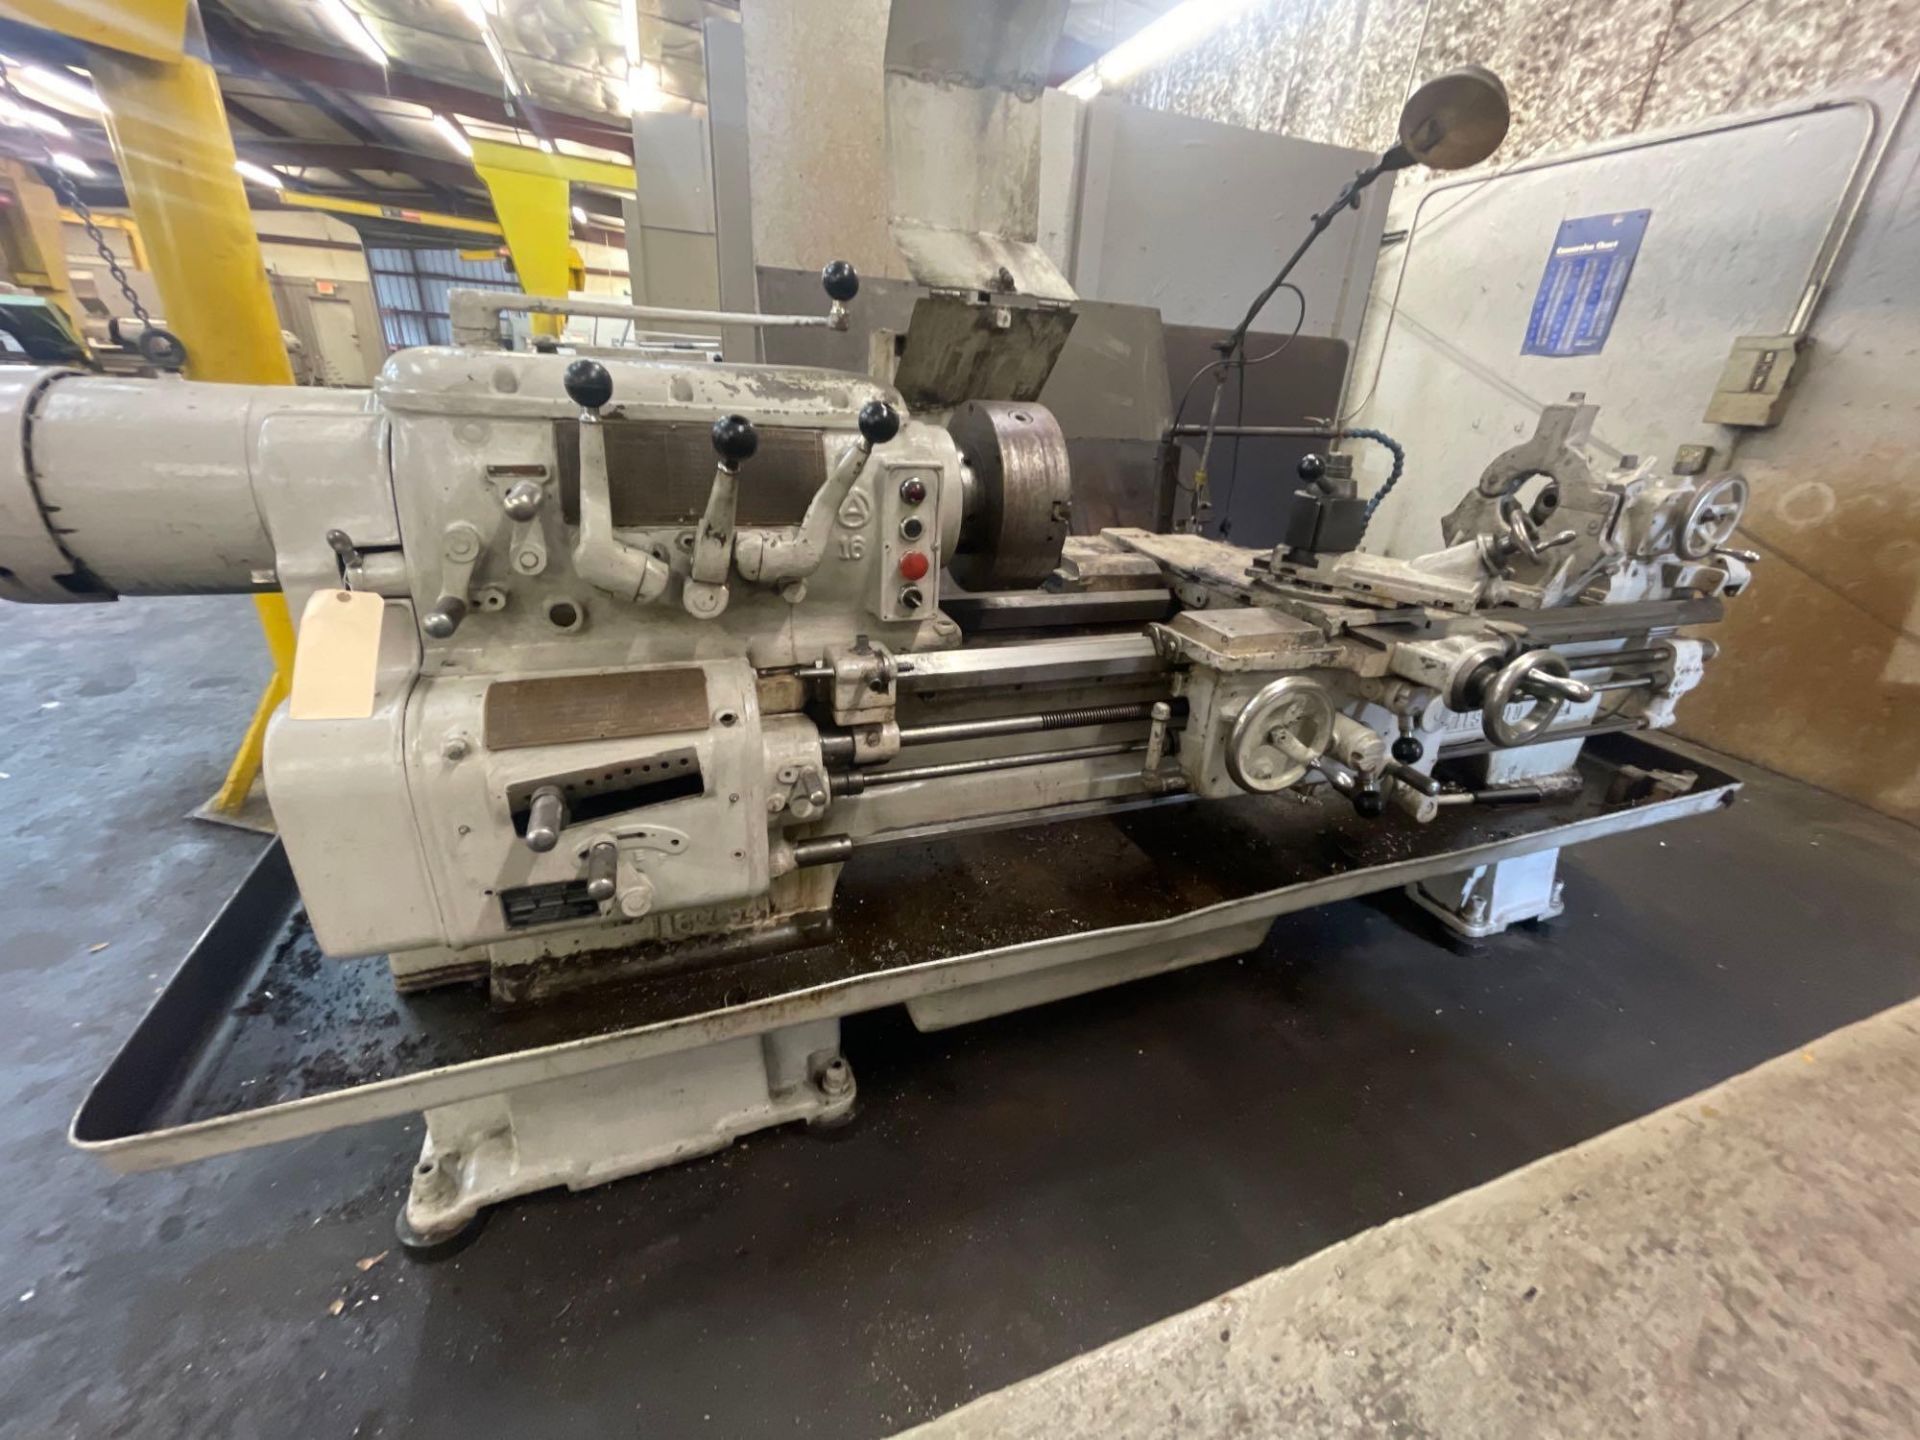 Axelson 16 Lathe, S/N 4673 - Image 2 of 11